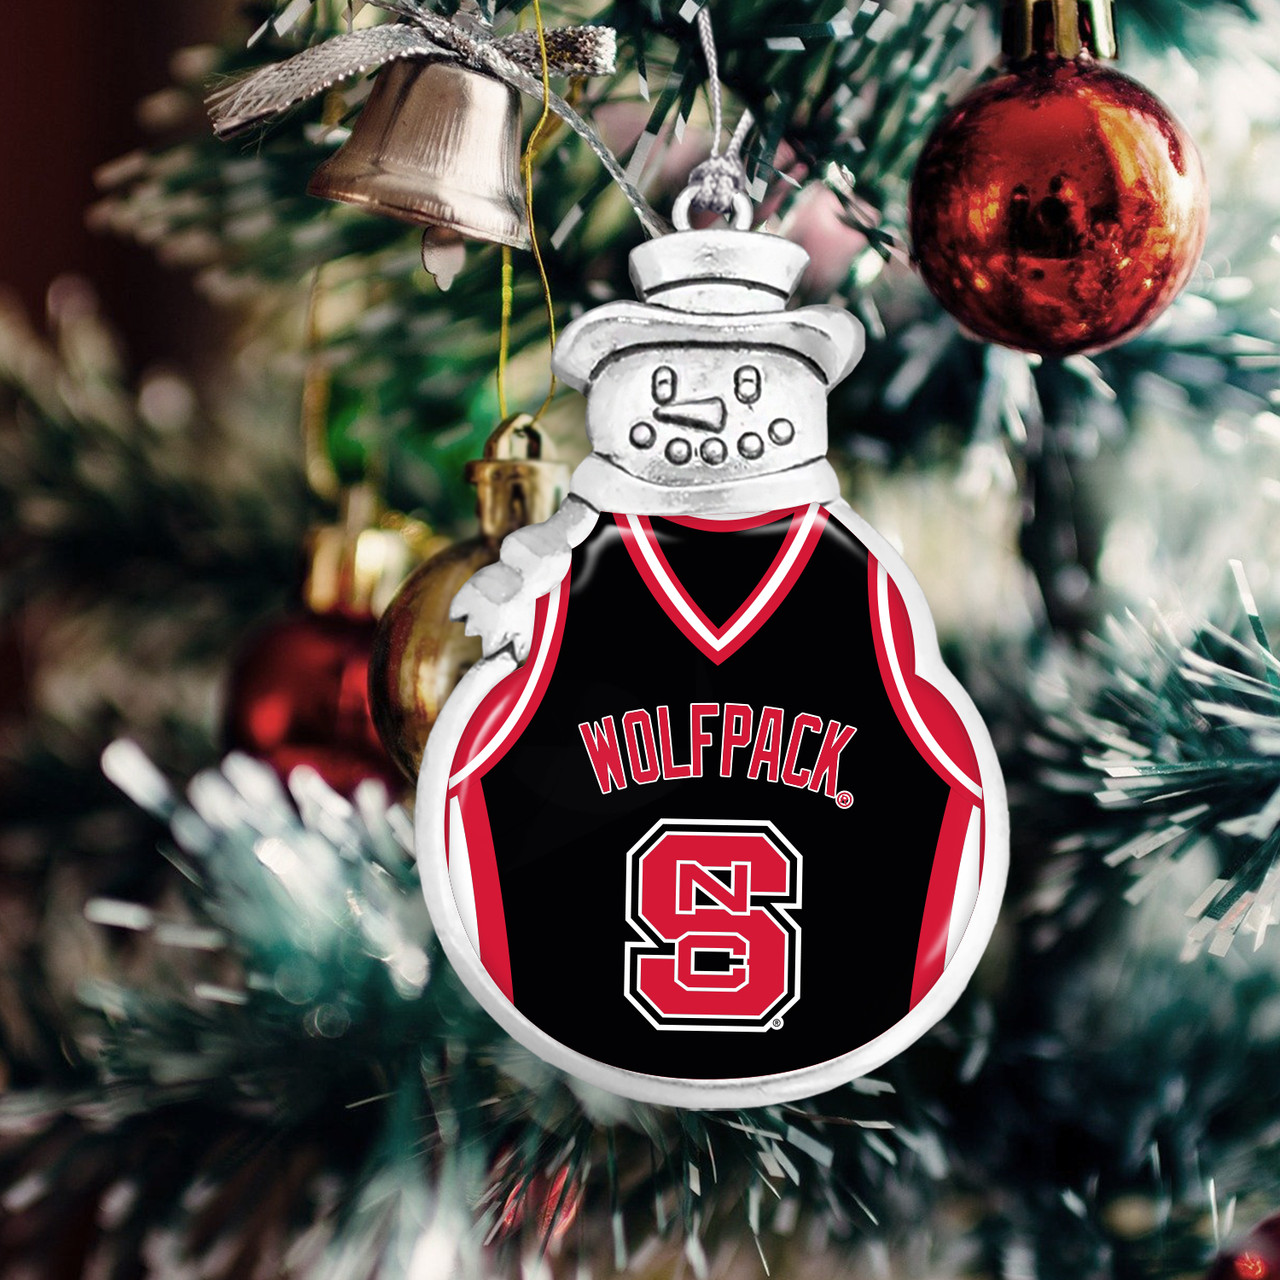 NC State Wolfpack Snowman Ornament with Basketball Jersey